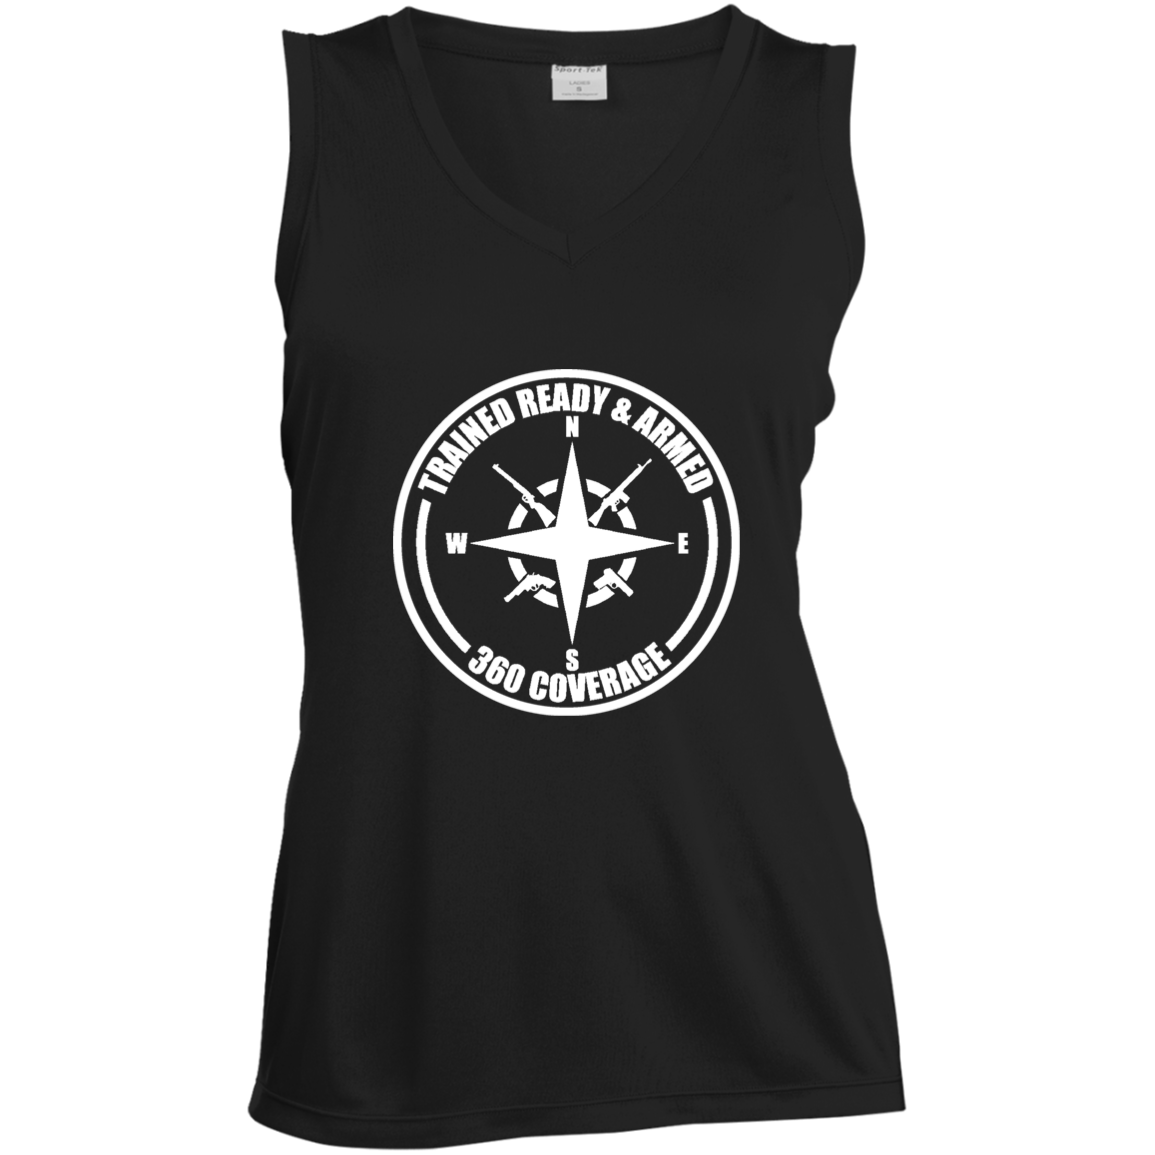 TRAINED READY ARMED LST352 Ladies' Sleeveless Moisture Absorbing V-Neck - Trained Ready Armed Apparel